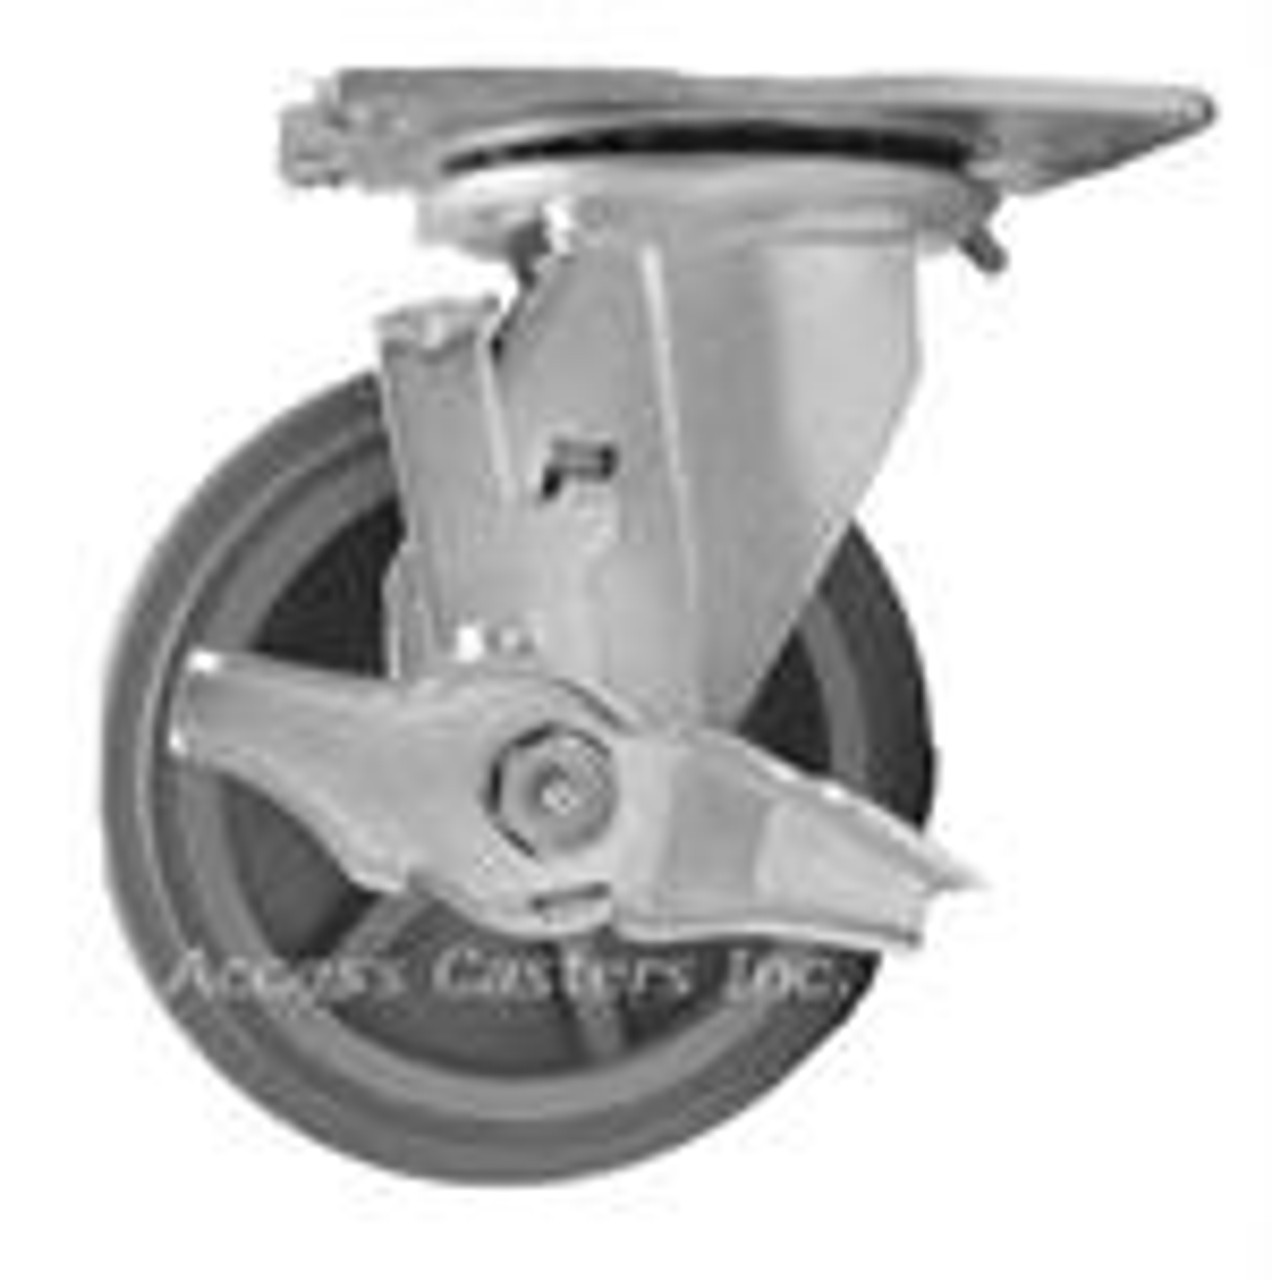 8" x 2" Swivel Plate Caster with Brake, Grey Non-Marking Wheel